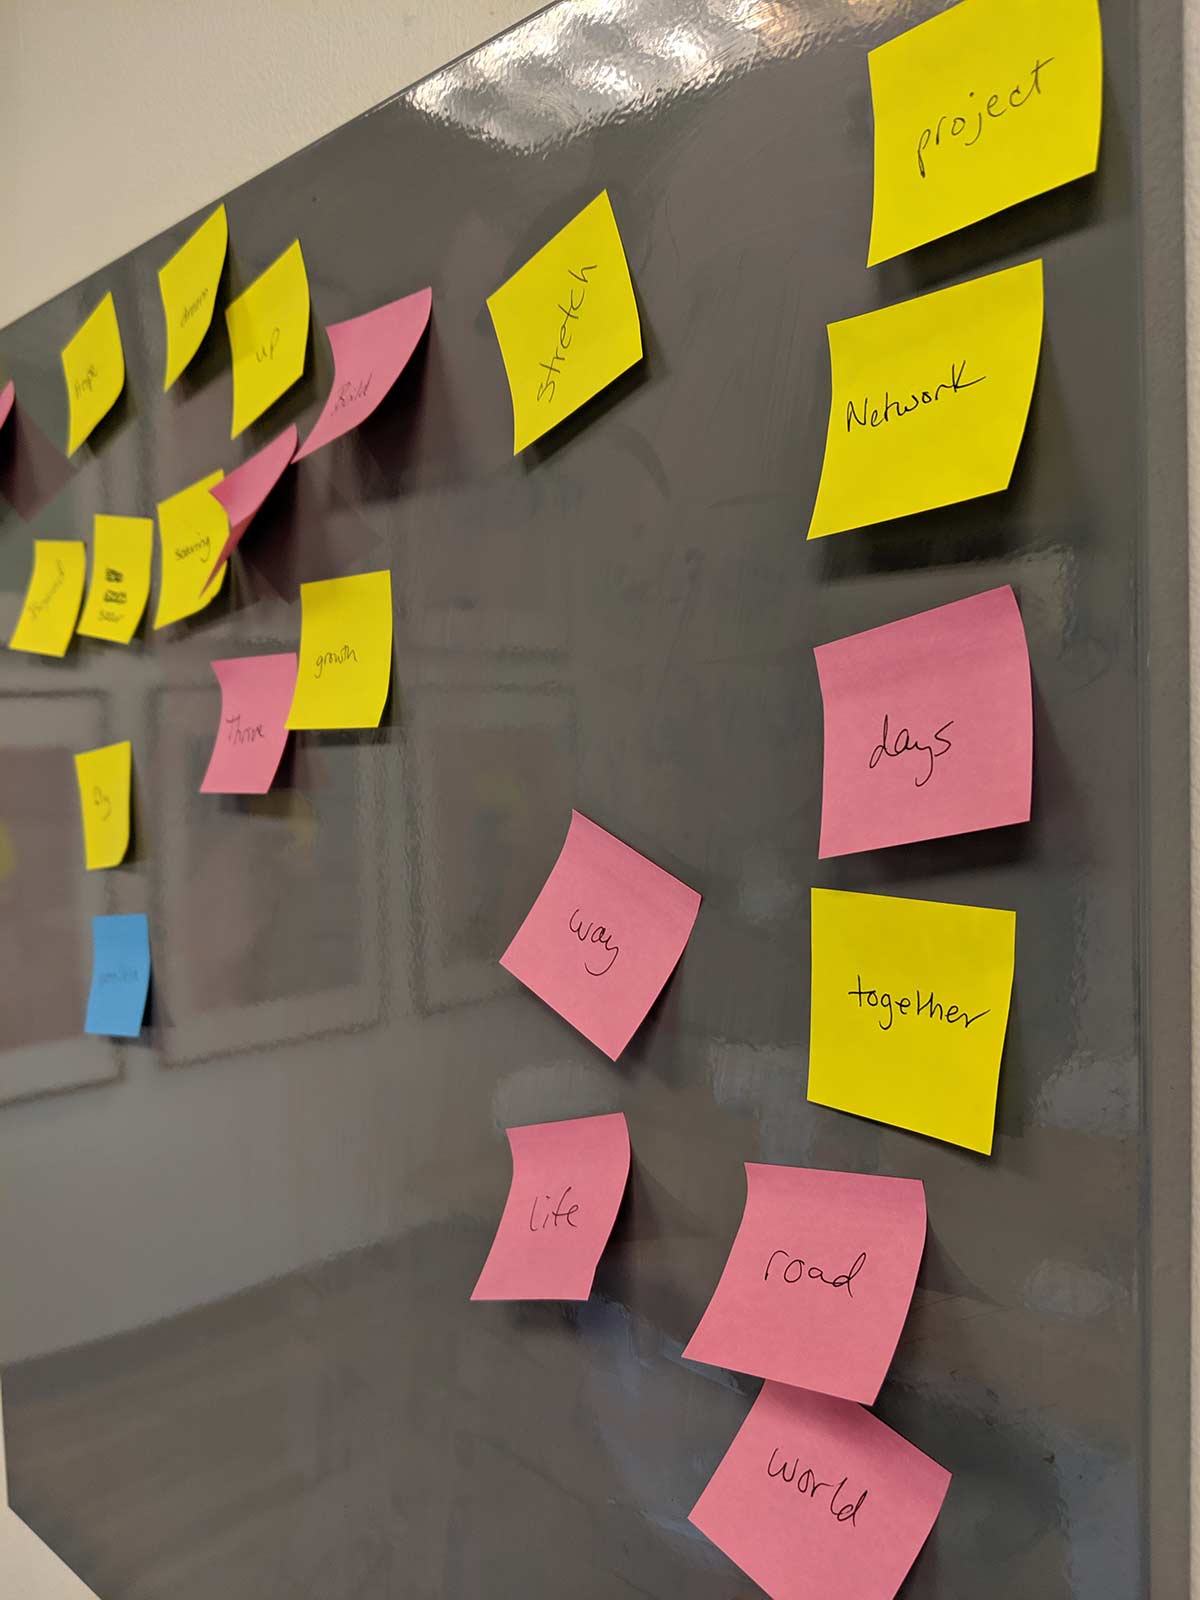 Startup Brandstorming process: How to Name Your Company